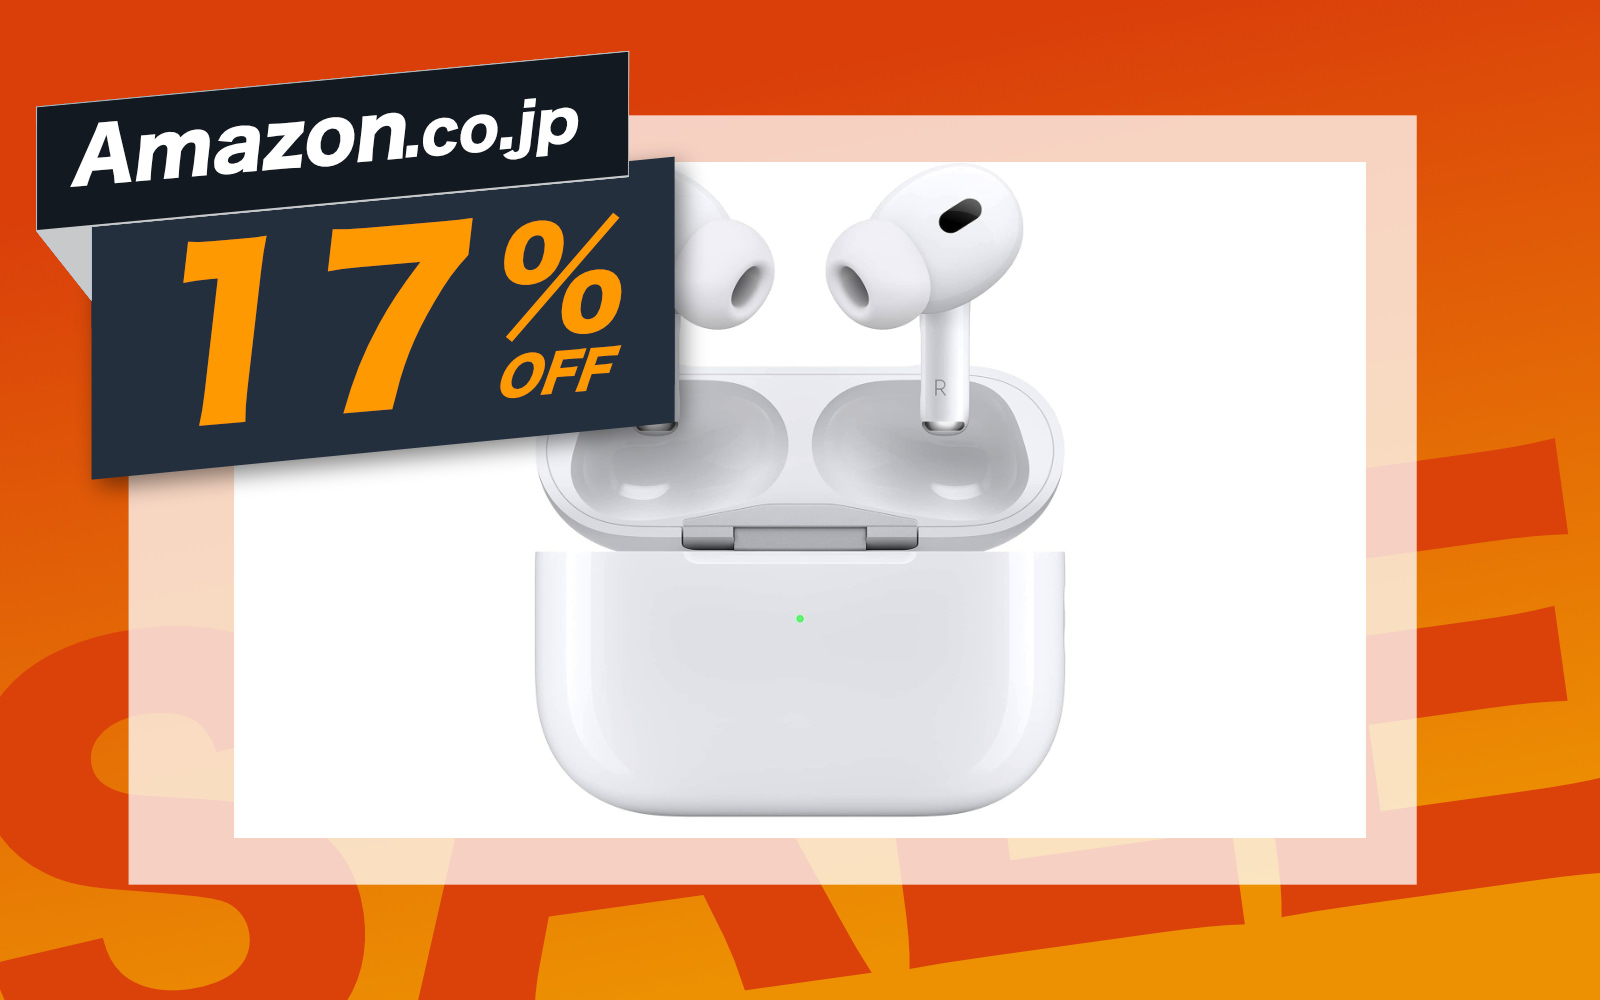 Airpods-Pro-2nggen-on-sale.jpg